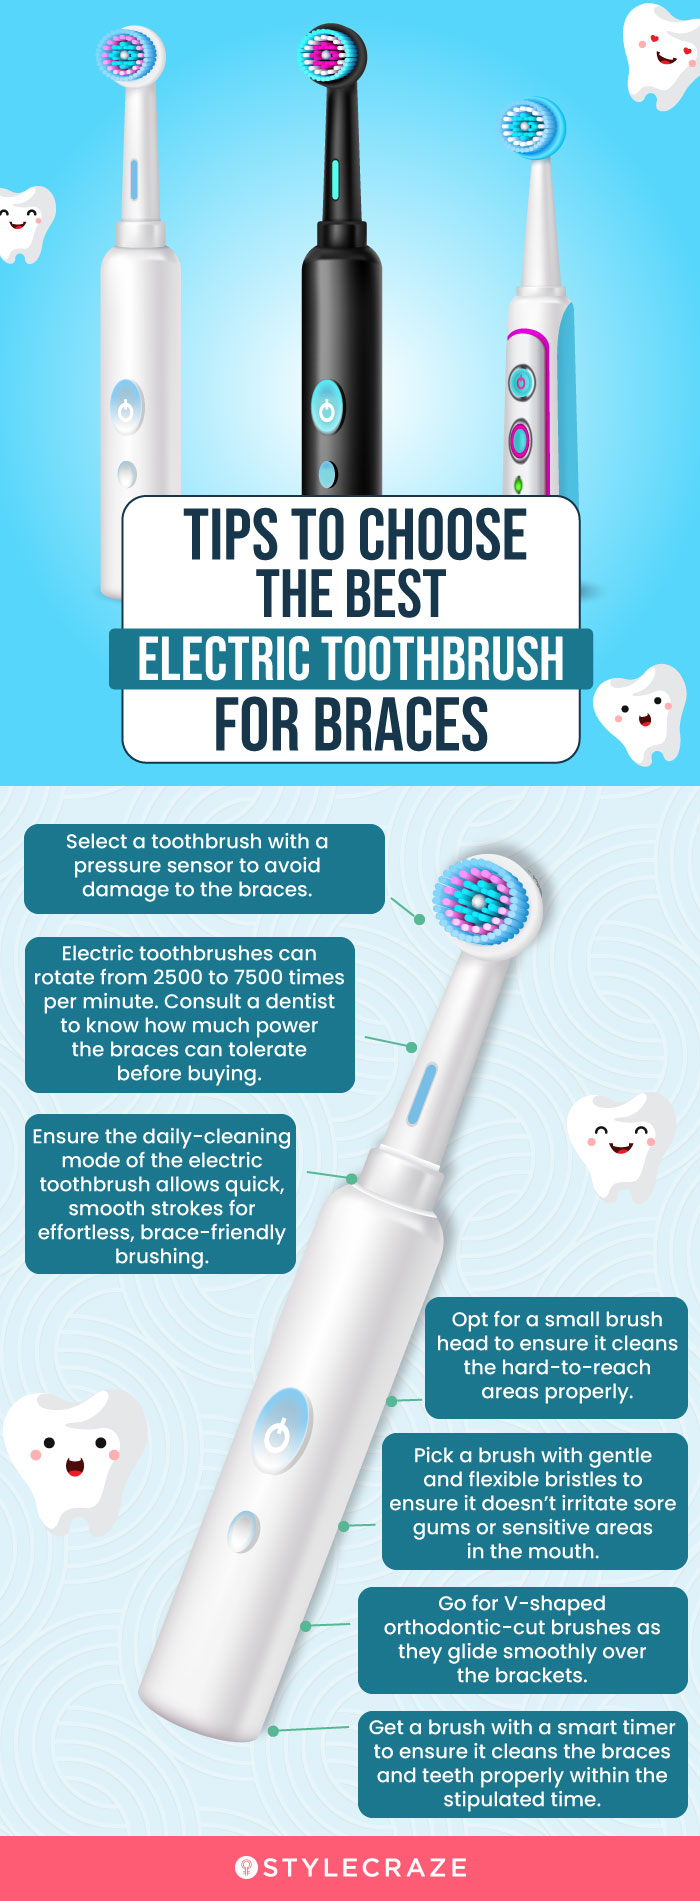 How To Choose The Best Electric Toothbrush For Your Braces? (infographic)